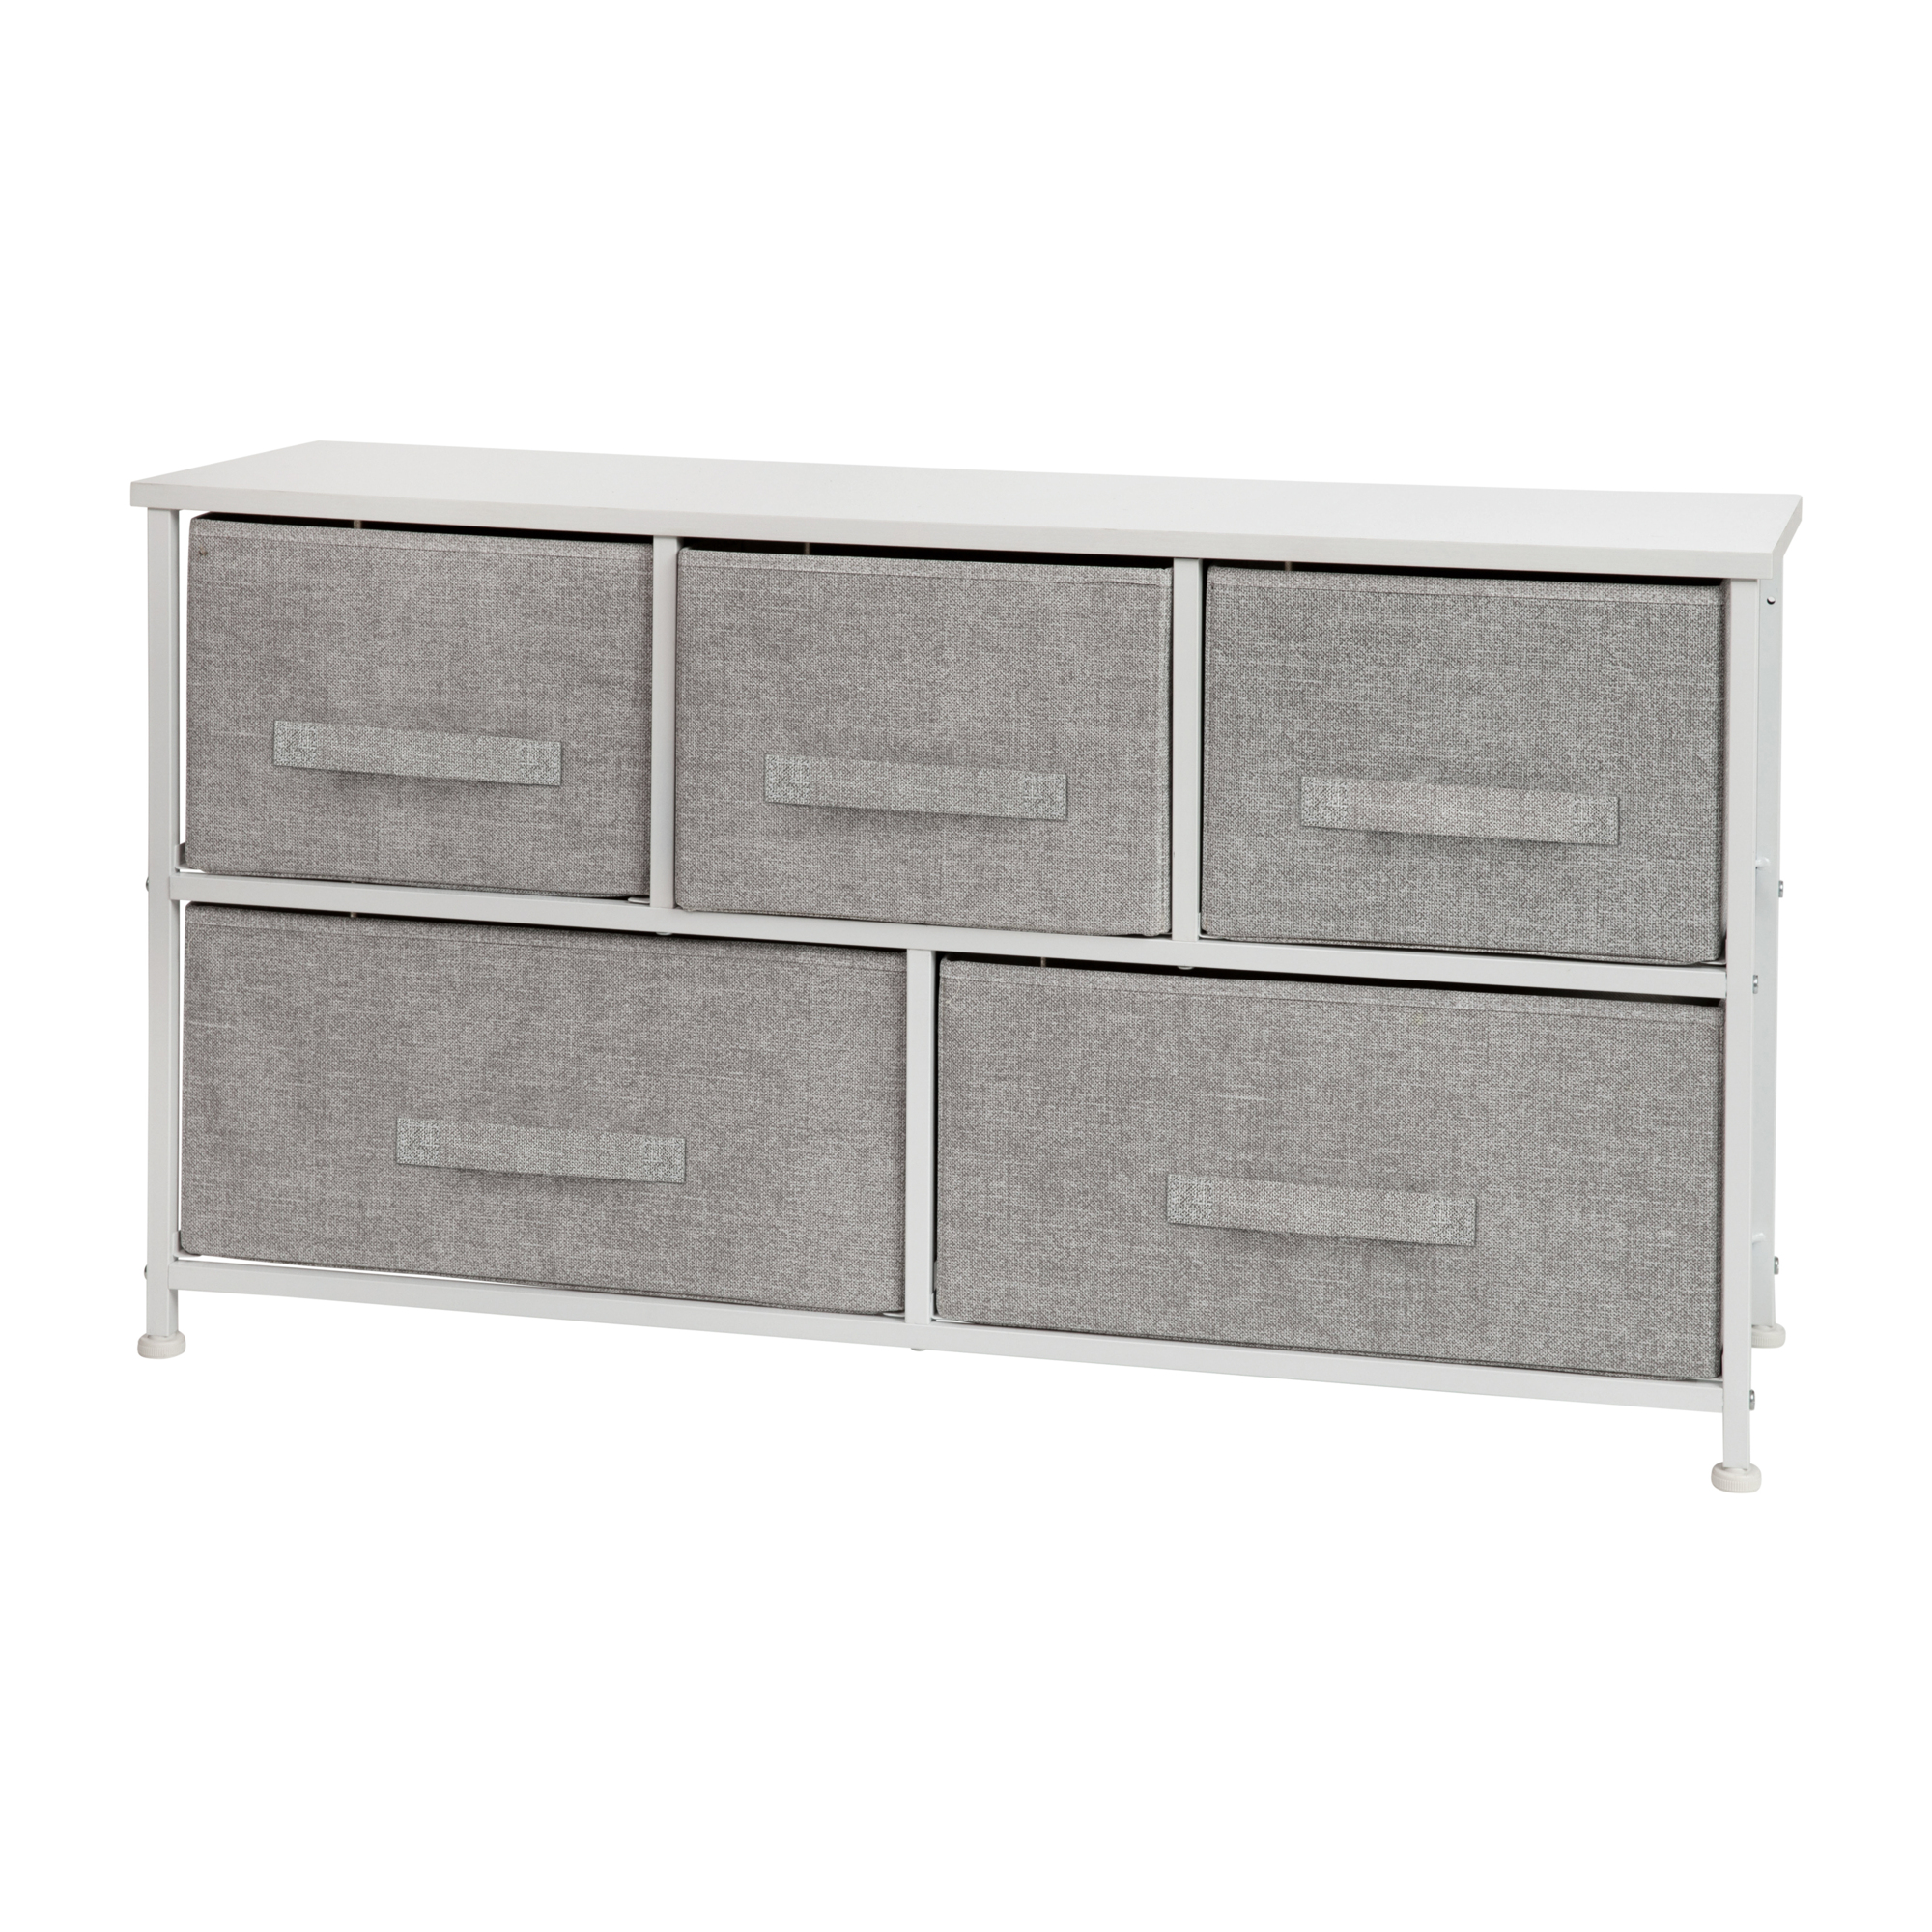 Flash Furniture, White/Gray 5 Drawer Storage Chest Organizer, Height 21.5 in, Width 39.5 in, Color White, Model WX5L206XWHGR